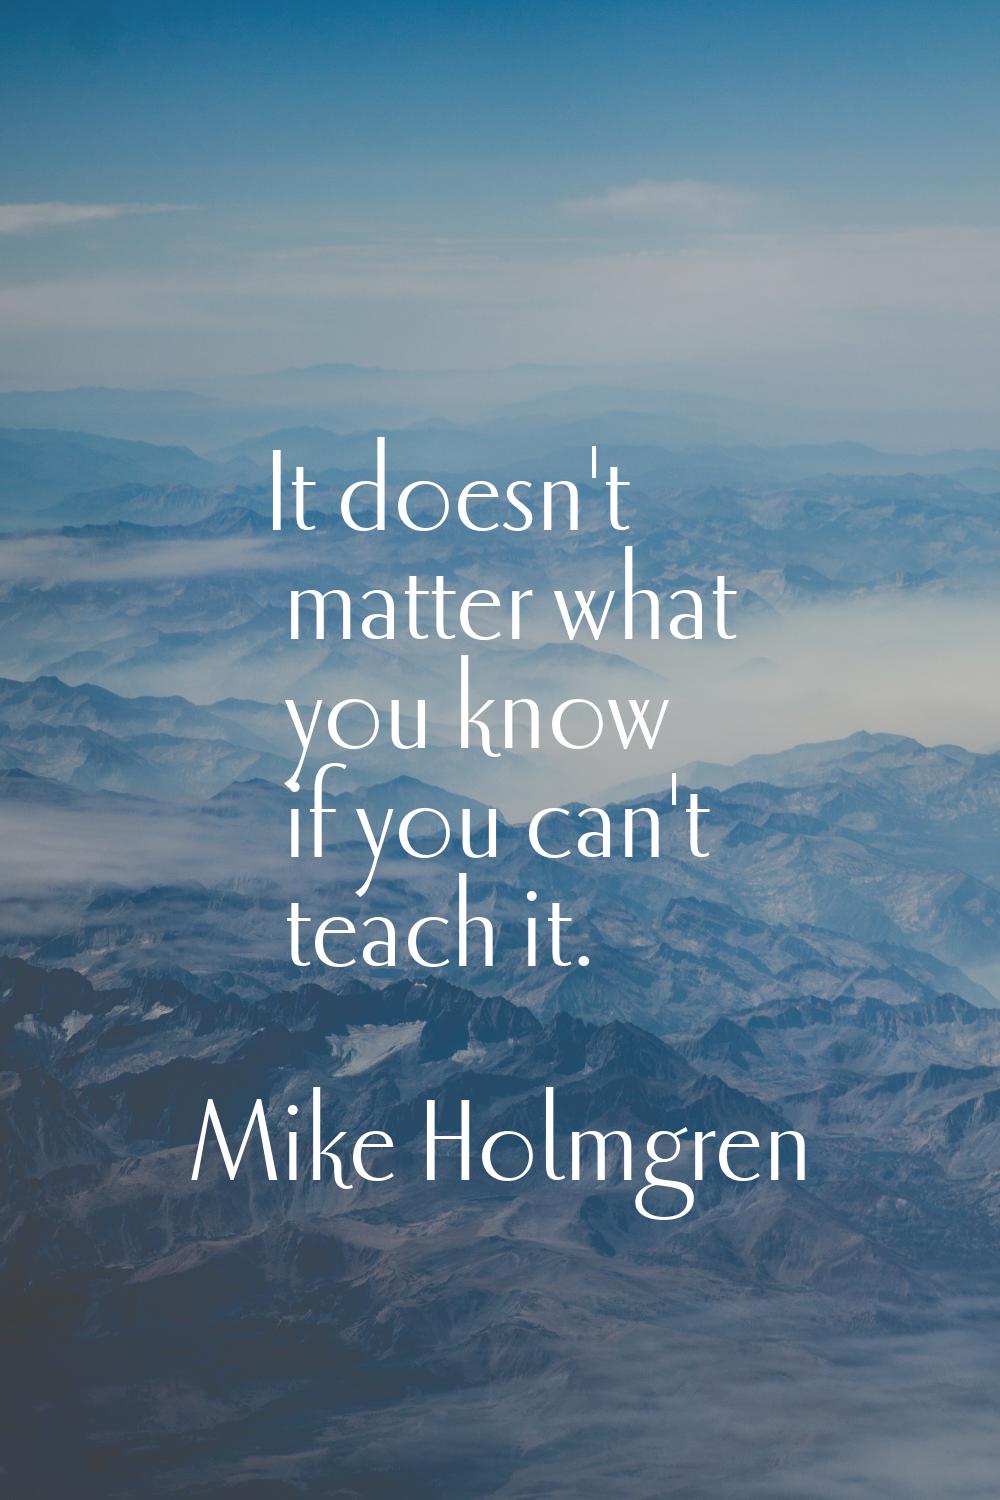 It doesn't matter what you know if you can't teach it.